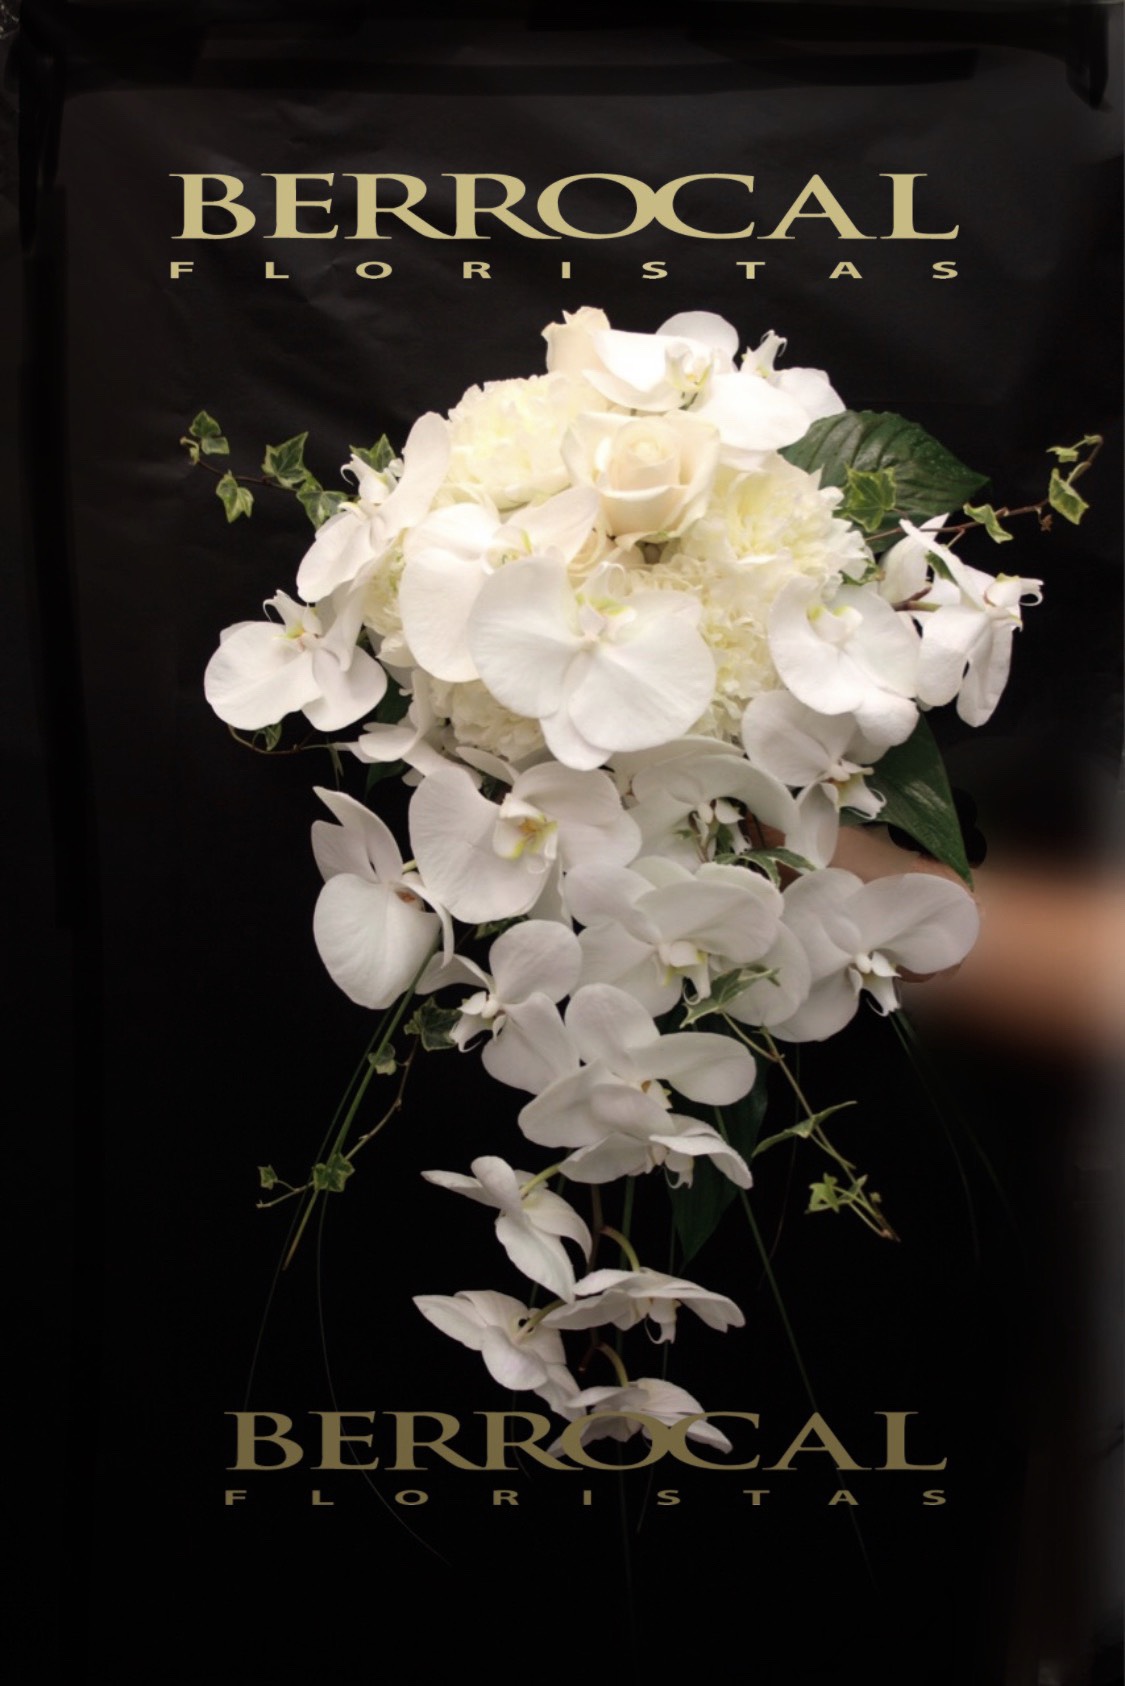 Gorgeous bridal bouquet in a traditional all white cascade style. With phalaenopsis orchids, roses, ivy.